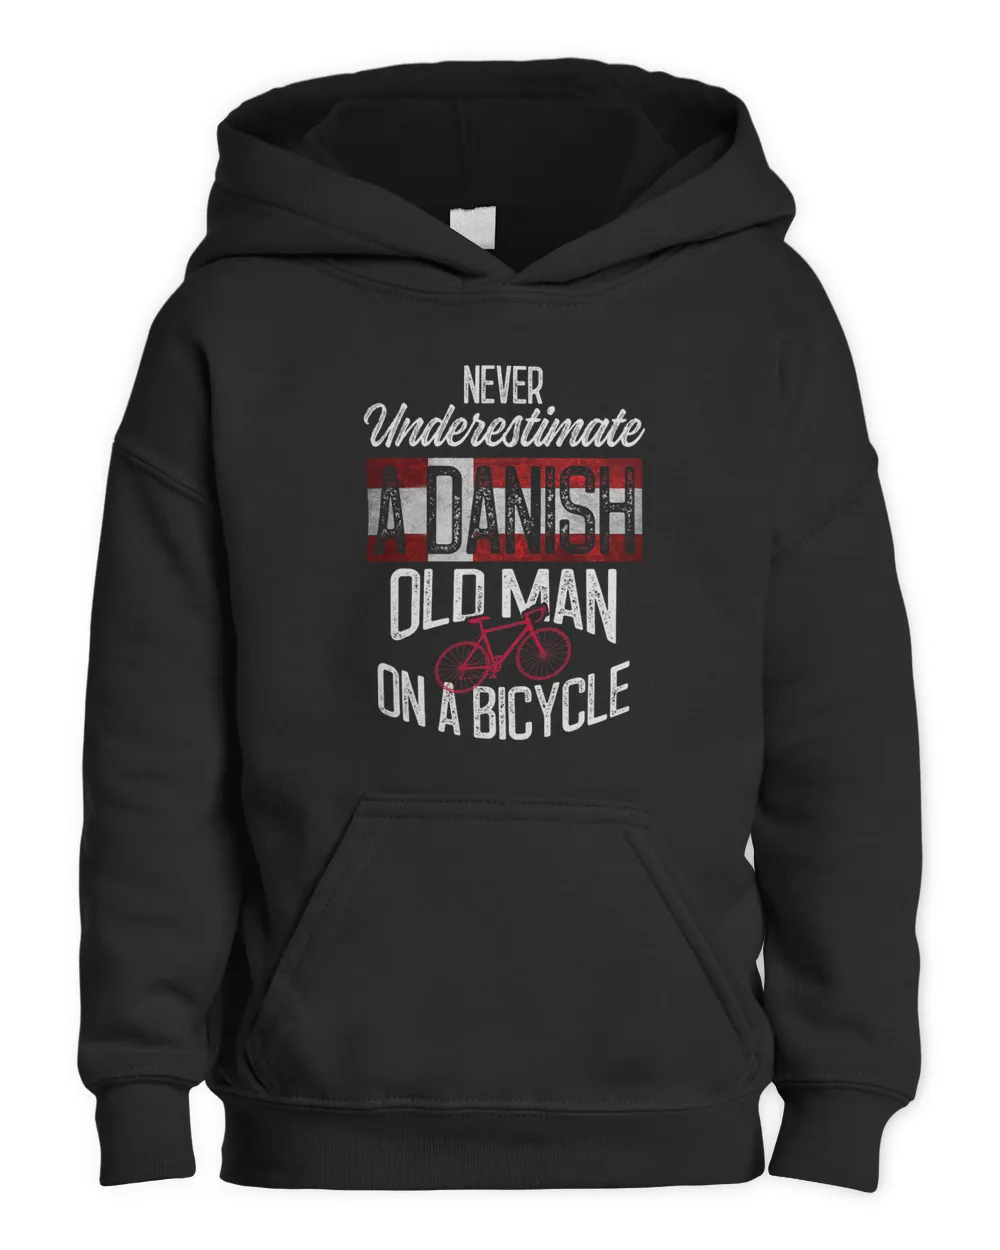 Funny Never Underestimate Danish Old Man On Bicycle Denmark